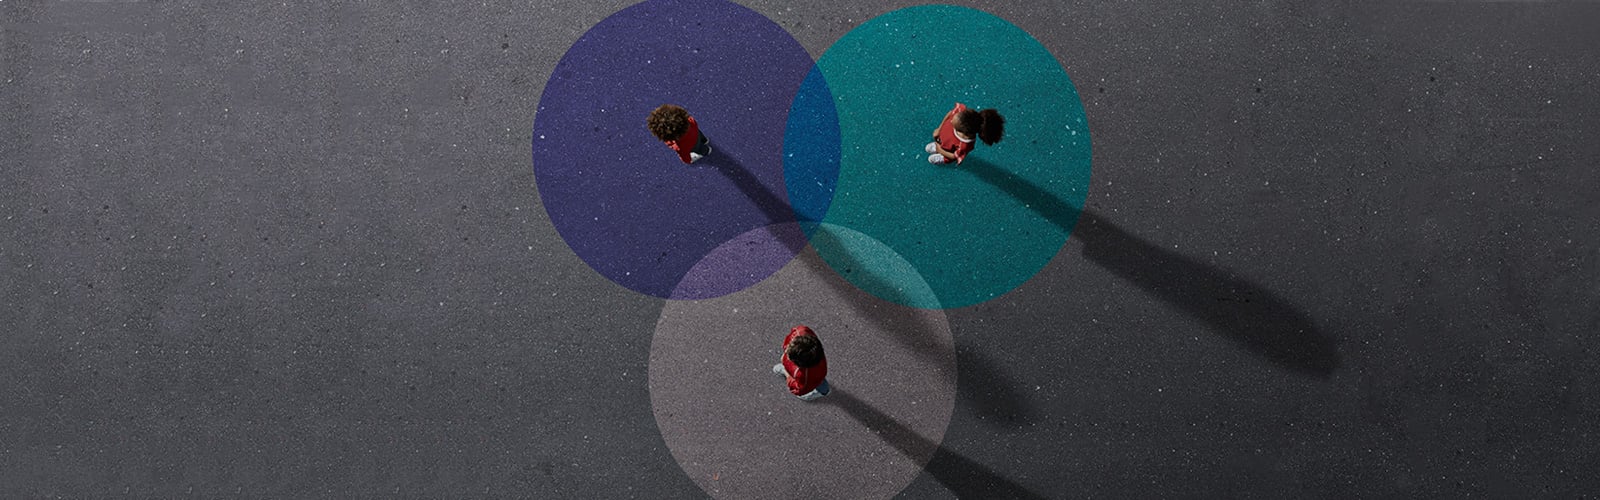 aerial view of 3 people standing in coloured circles on the ground